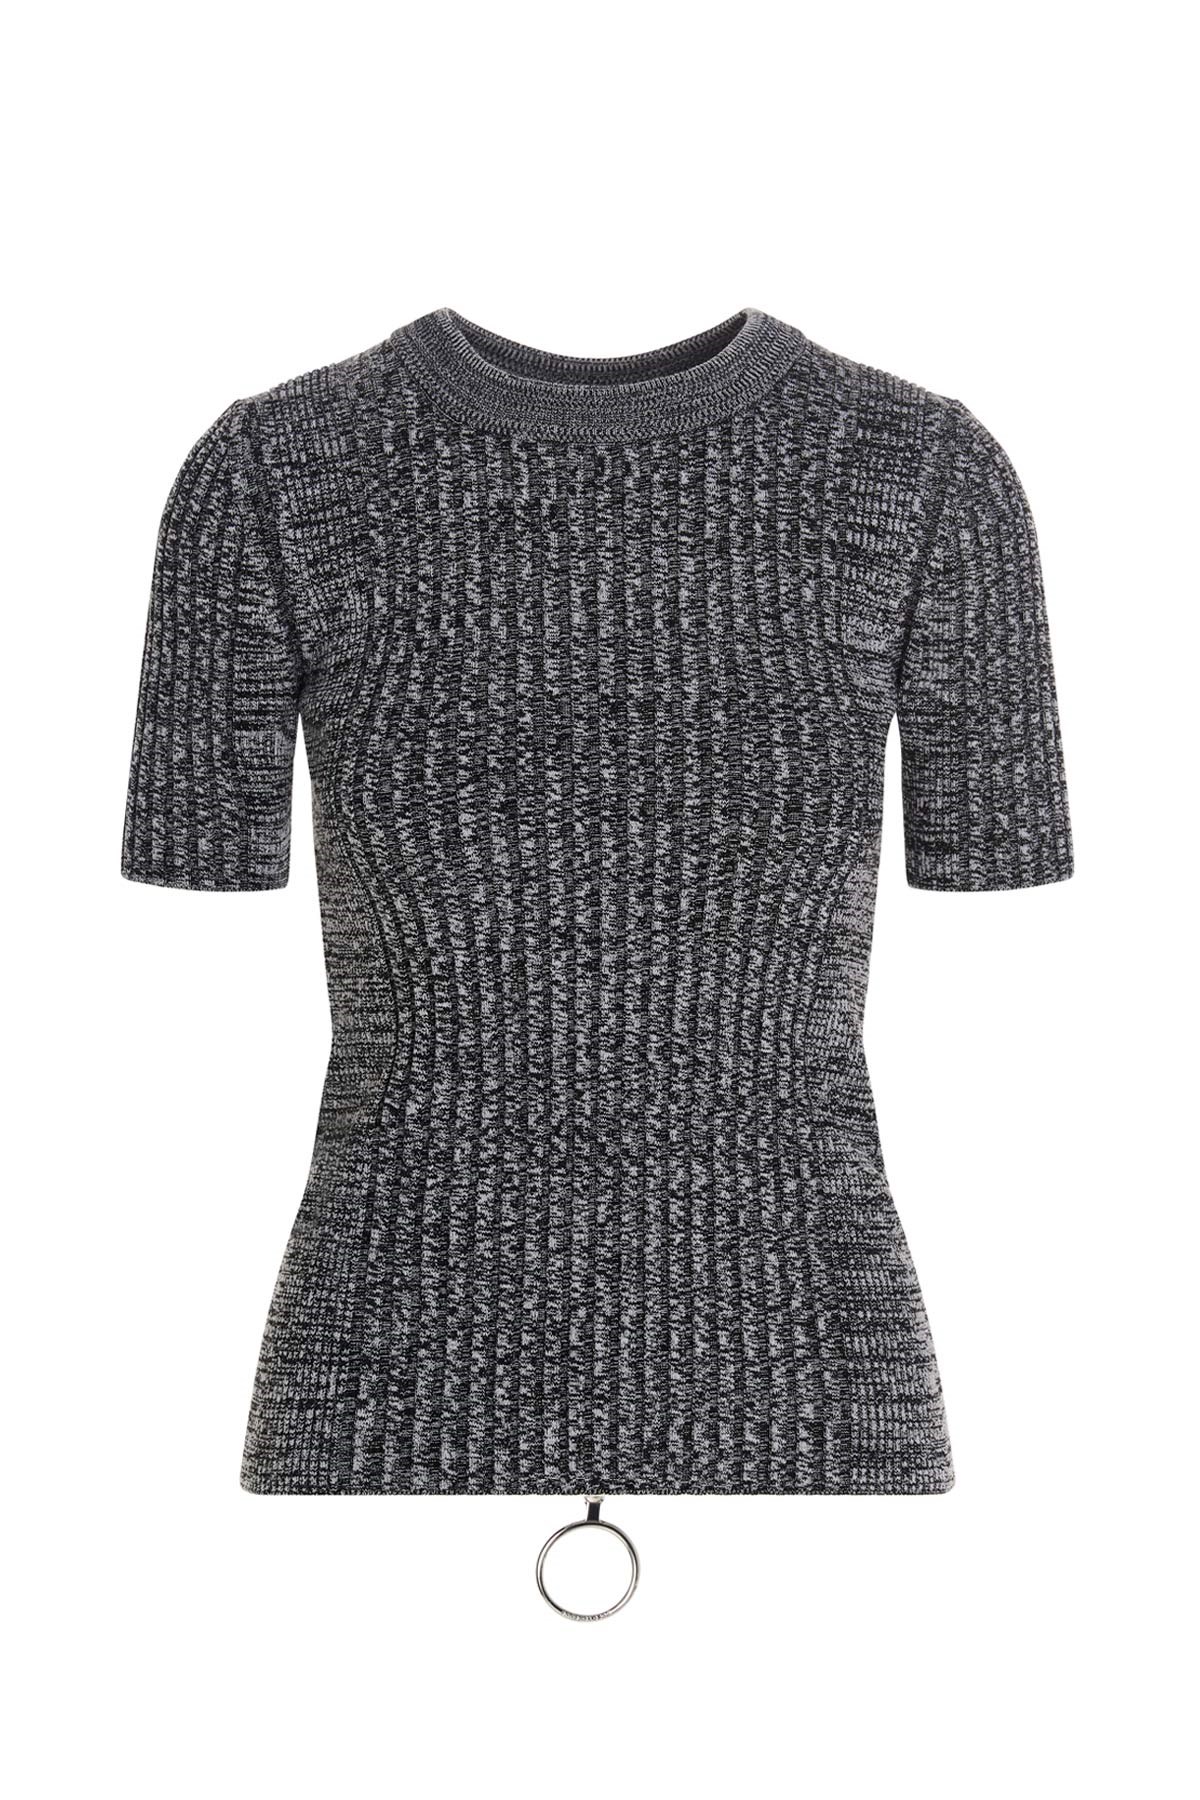 PACO RABANNE Knit Top